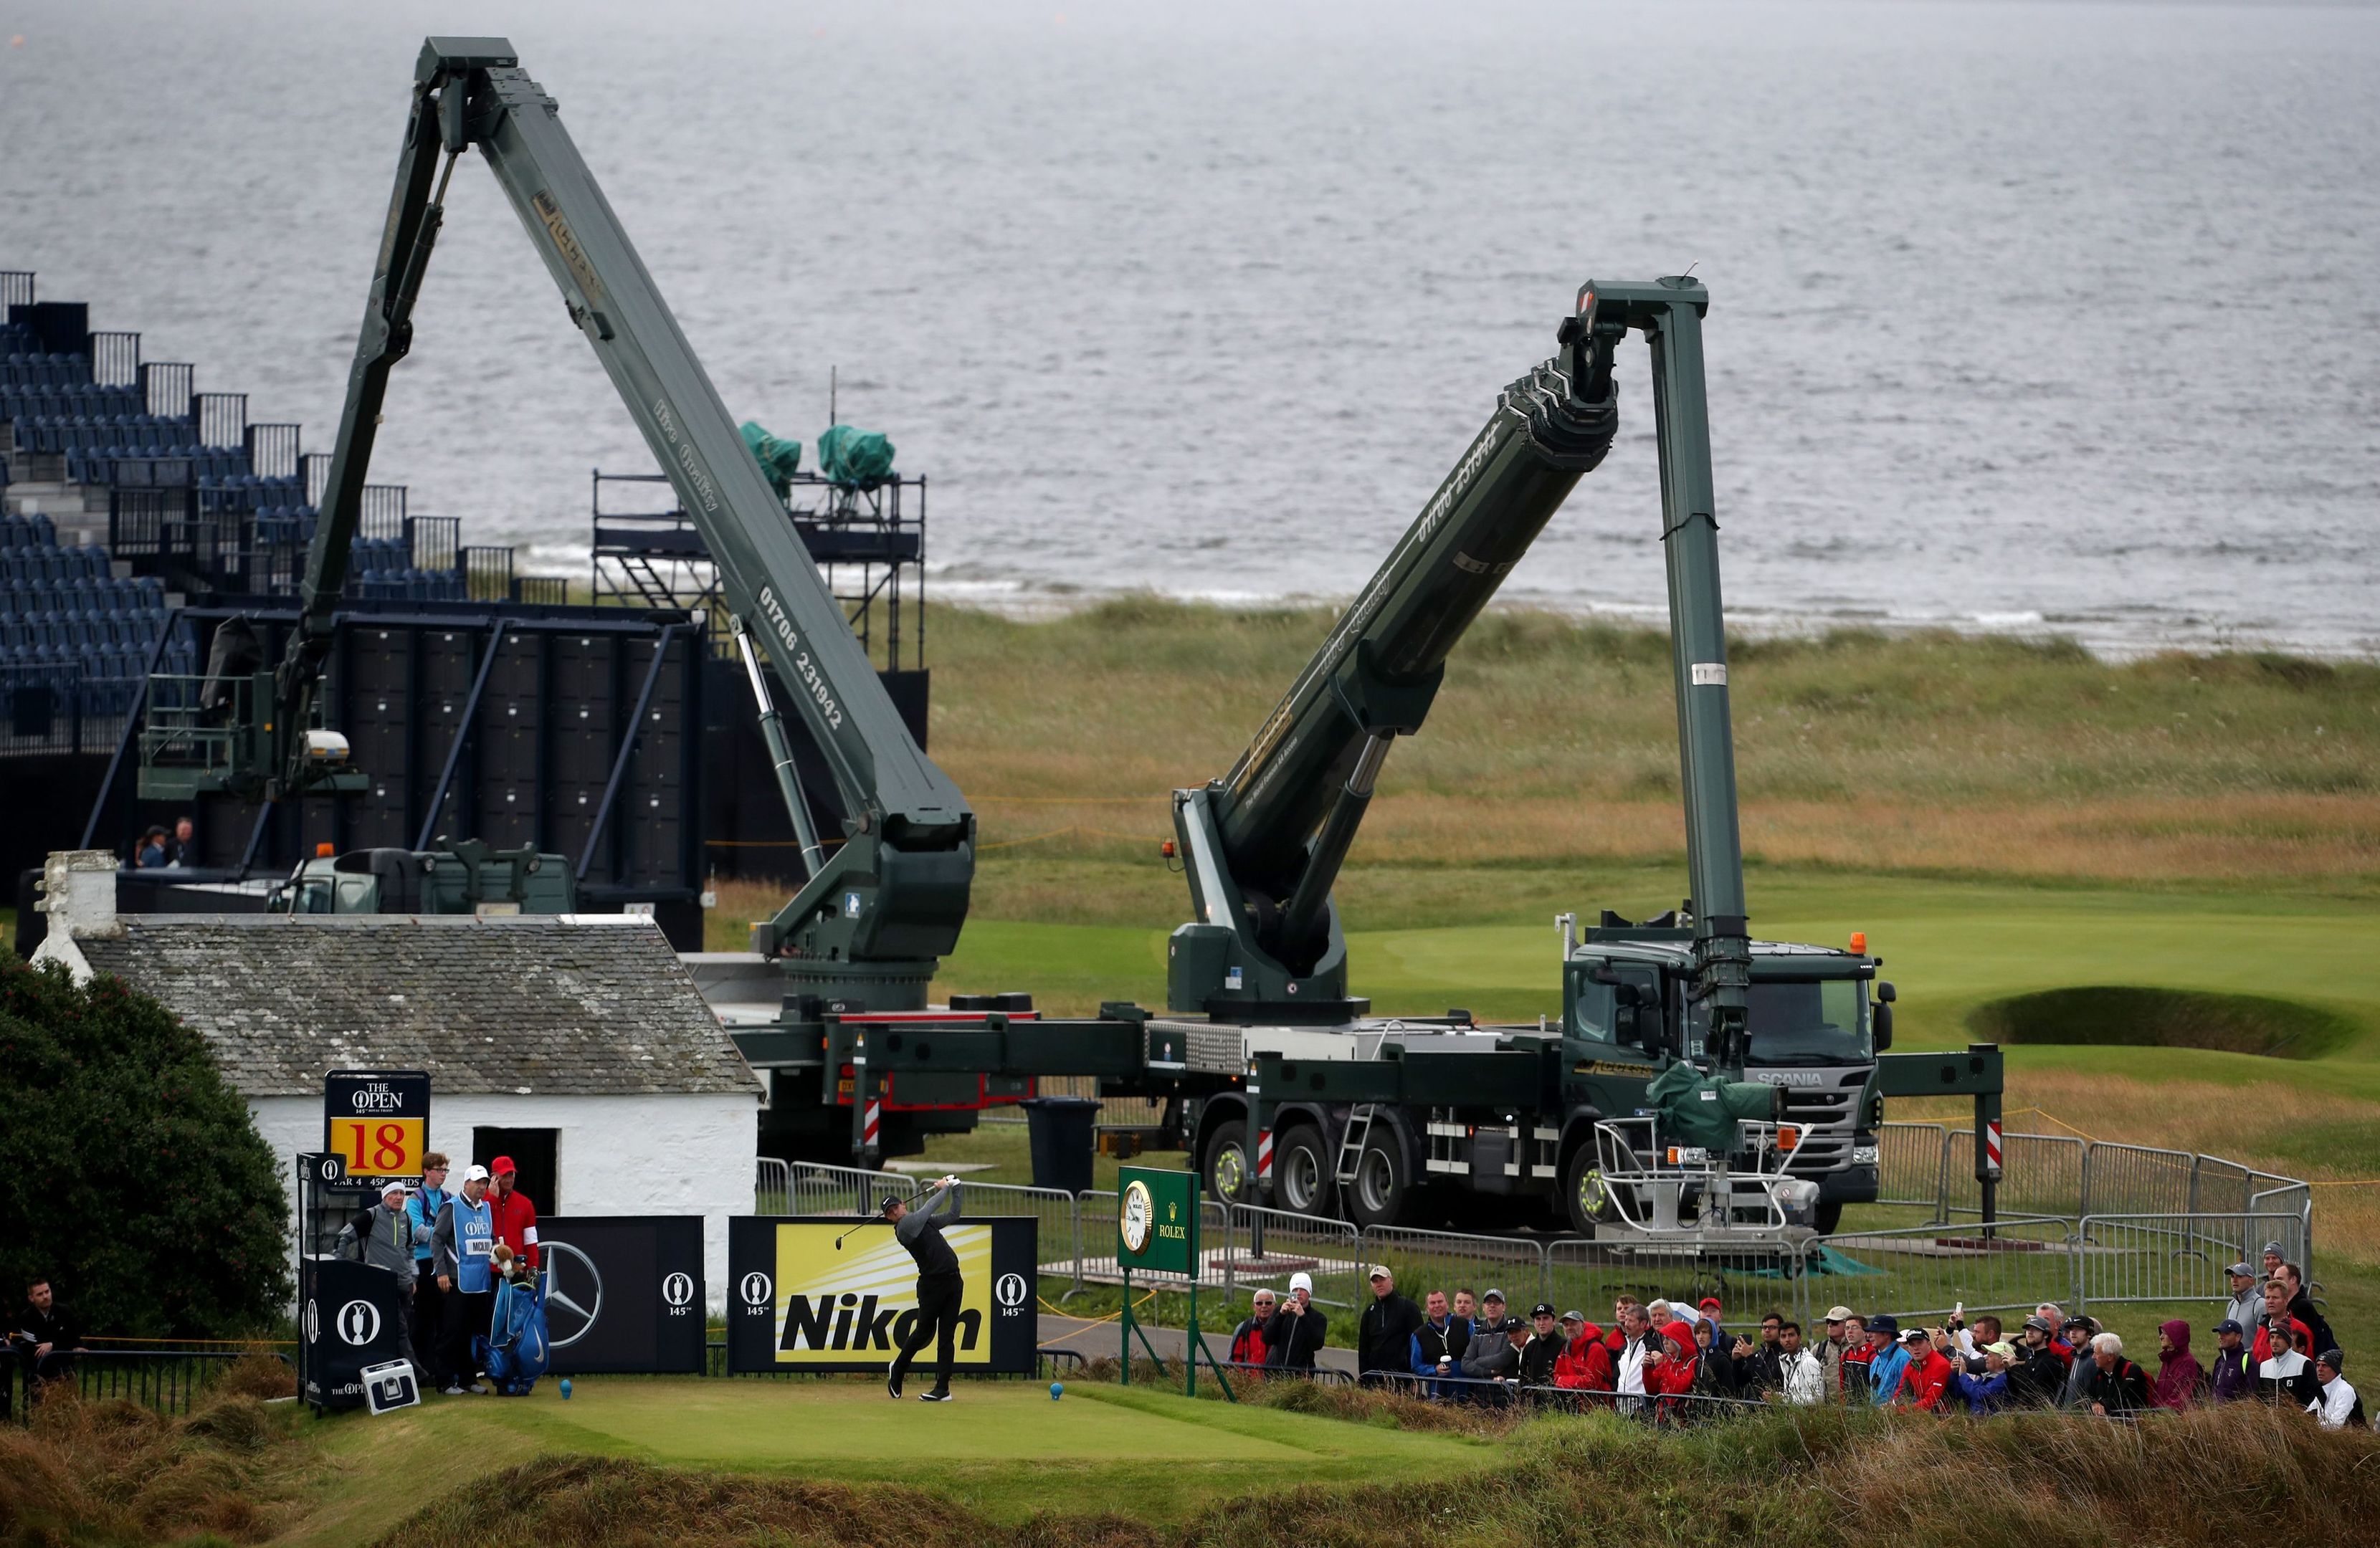 Rory McIlroy tees off the 18th during the final practice day at Royal Troon.